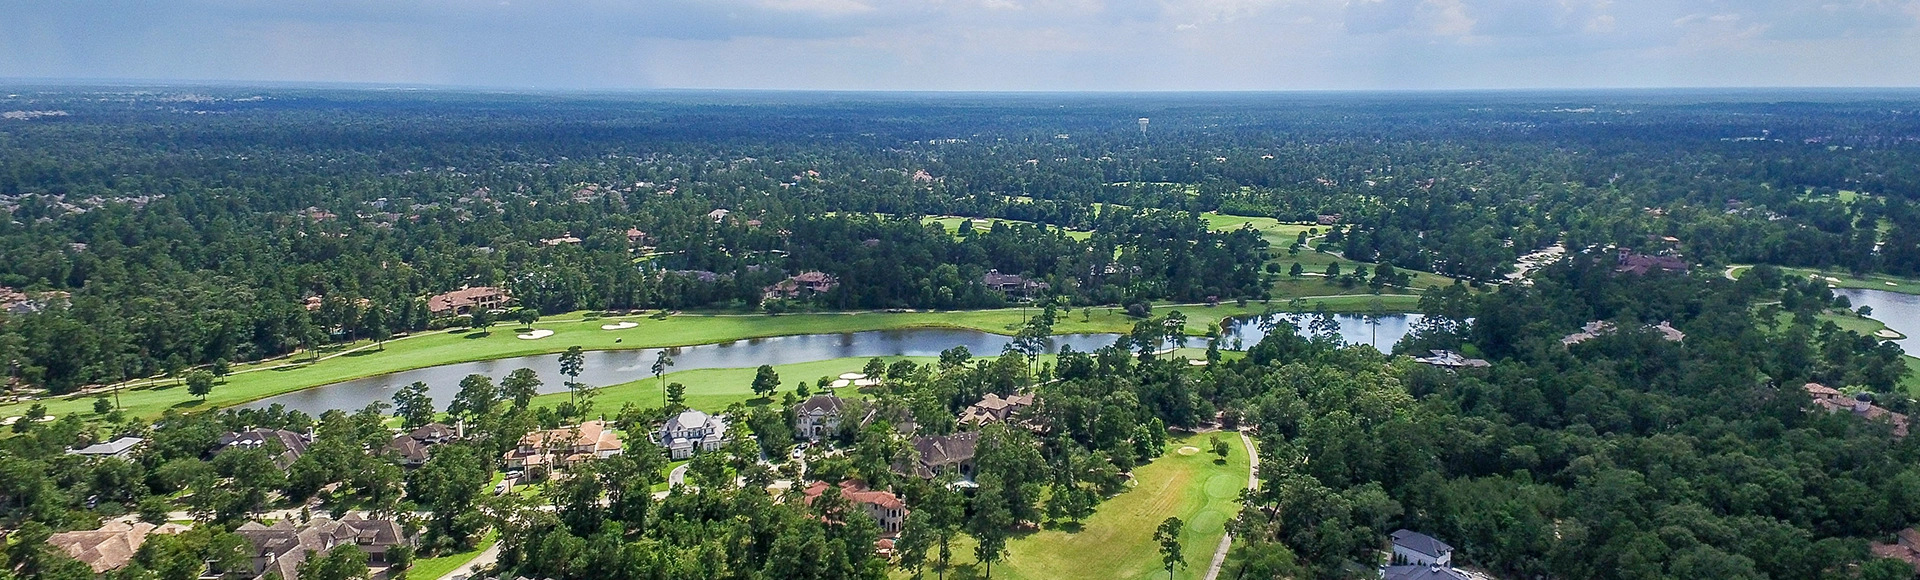 Aerial View from the Woodlands, Texas, USA
